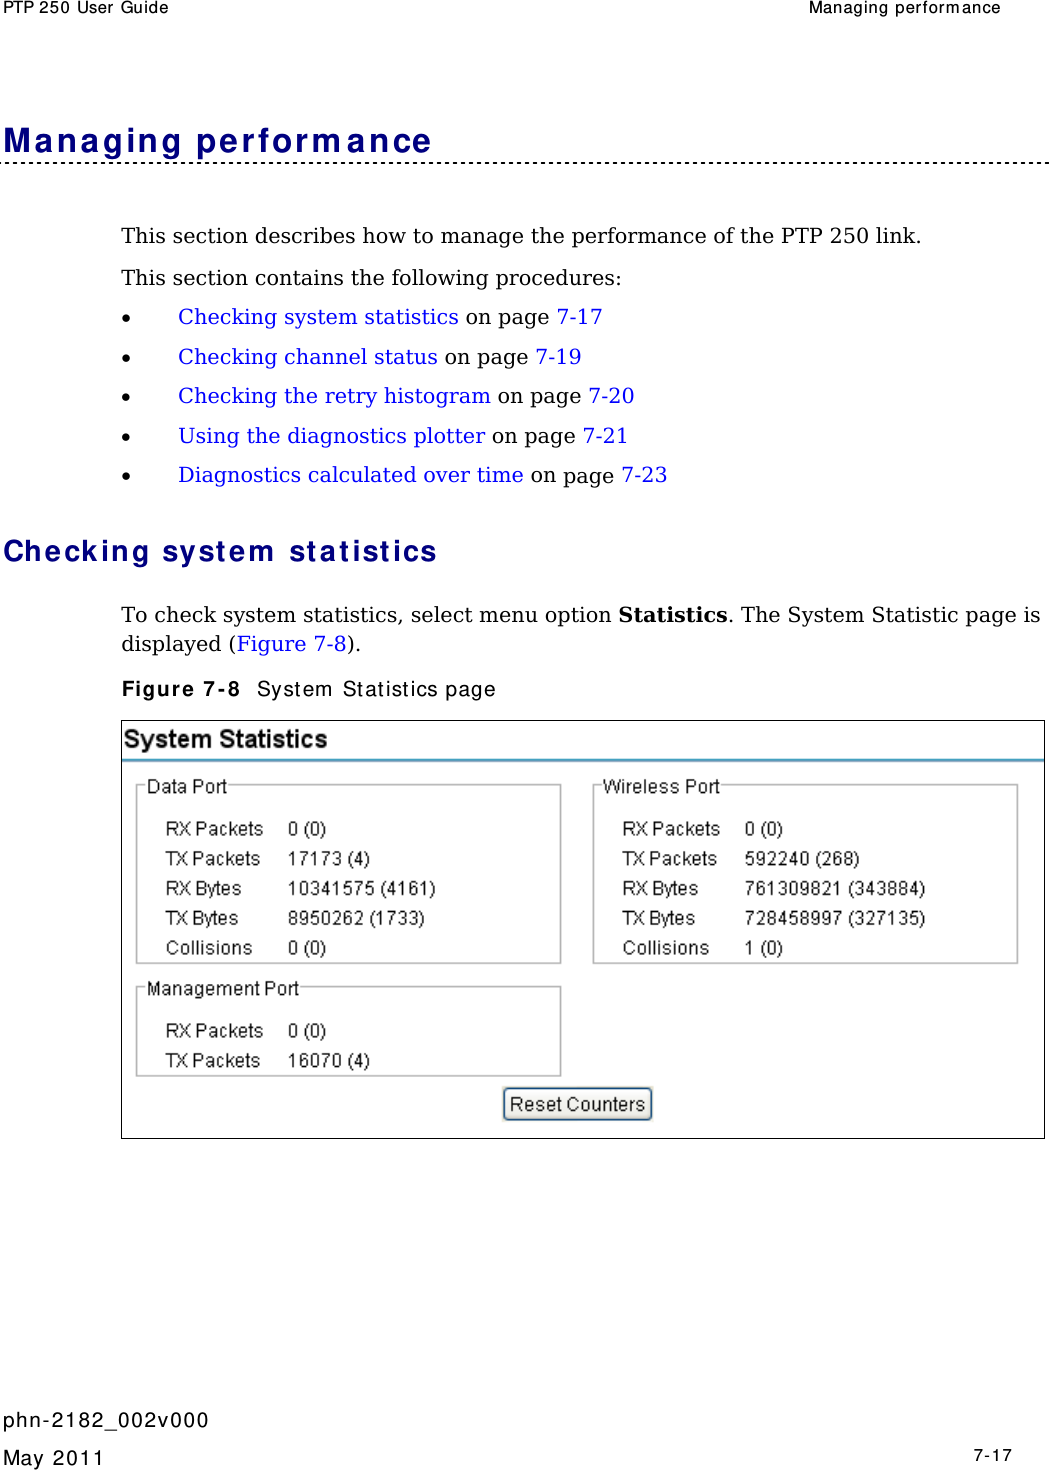 PTP 250 User Guide  Managing perform ance   phn- 2182_002v000   May 2011   7-17  Mana ging perform ance This section describes how to manage the performance of the PTP 250 link.  This section contains the following procedures: • Checking system statistics on page 7-17 • Checking channel status on page 7-19 • Checking the retry histogram on page 7-20 • Using the diagnostics plotter on page 7-21 • Diagnostics calculated over time on page 7-23 Che cking syst e m  sta t ist ics  To check system statistics, select menu option Statistics. The System Statistic page is displayed (Figure 7-8). Figure 7 - 8   Syst em  Statist ics page  